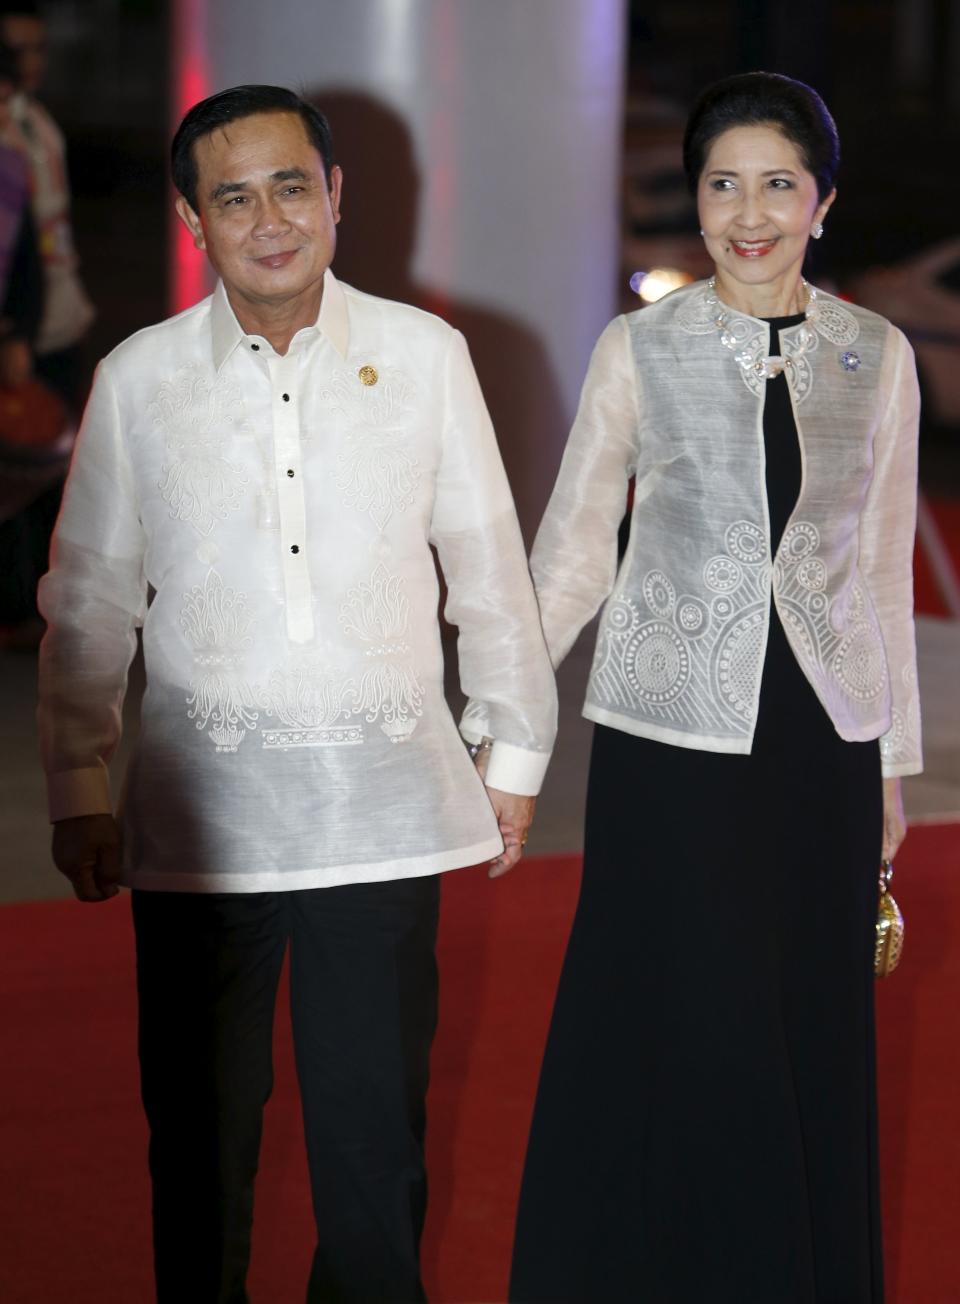 Thailand's Prime Minister Prayut Chan-ocha and his wife Naraporn arrive for a welcome dinner during the Asia-Pacific Economic Cooperation (APEC) summit in the capital city of Manila, Philippines